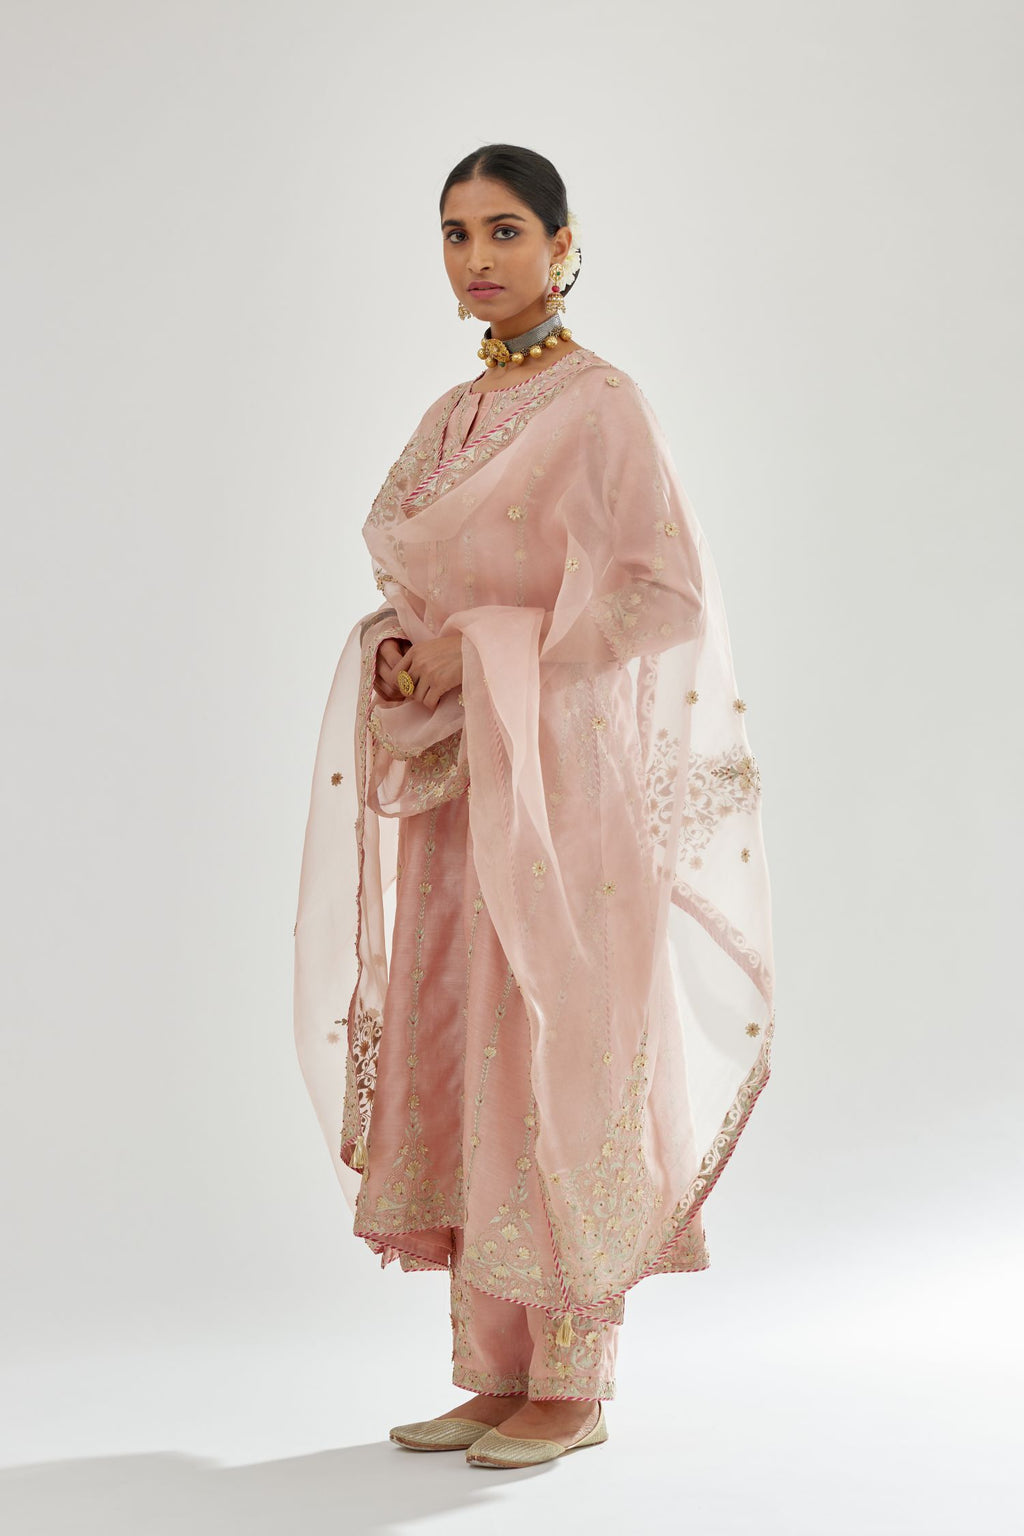 Pink silk organza dupatta with dori and gota embroidery at edges, highlighted with contrast bead work.